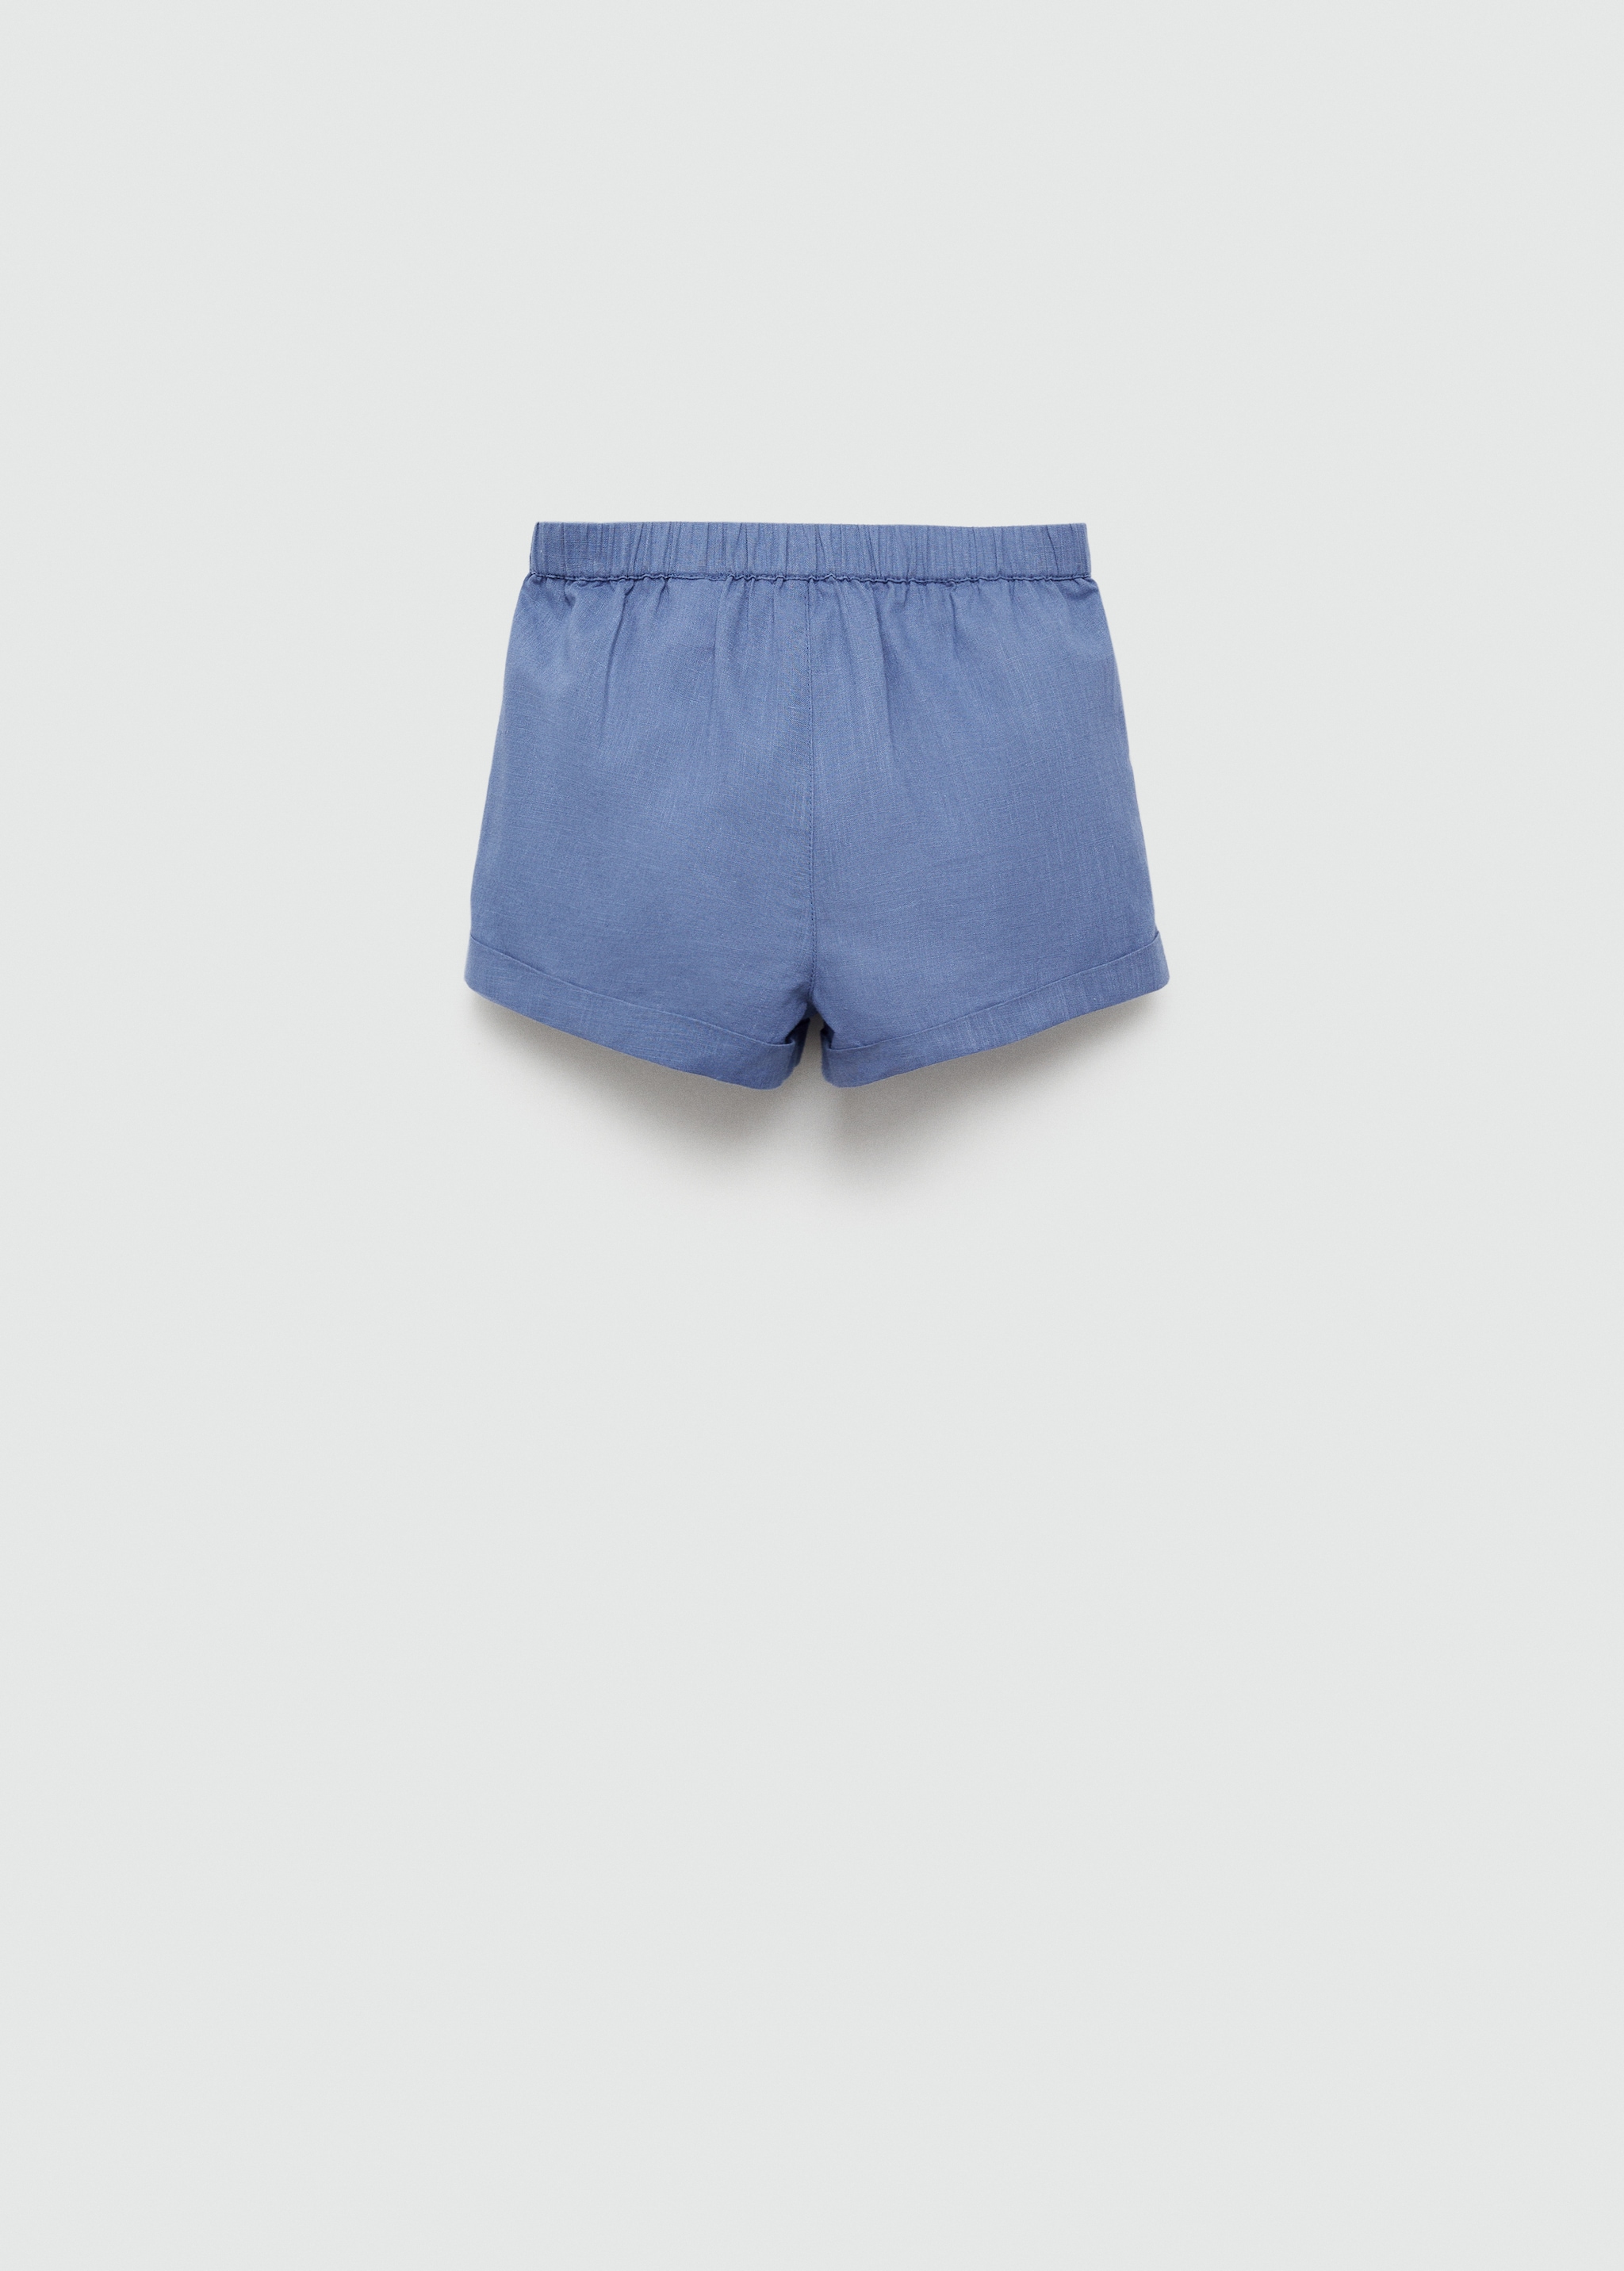 Cotton shorts - Reverse of the article